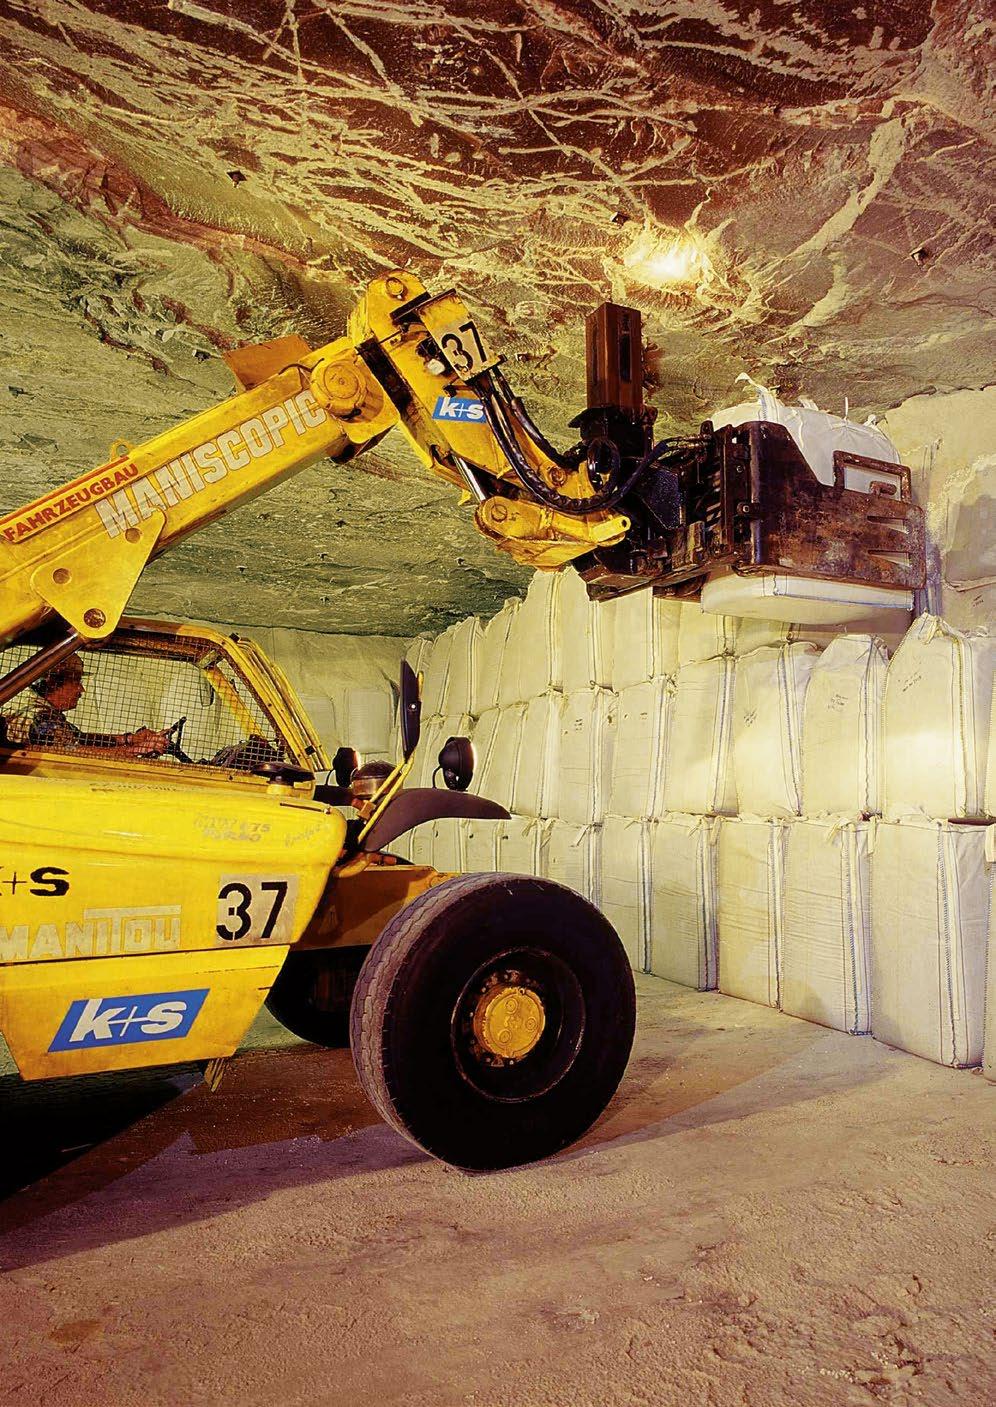 Waste analysis and disposal concepts Coordination of transport and packing Five facilities for underground recovery Support in authorisation procedures P E R F O R M A N C E S A F E T Y Salt mining